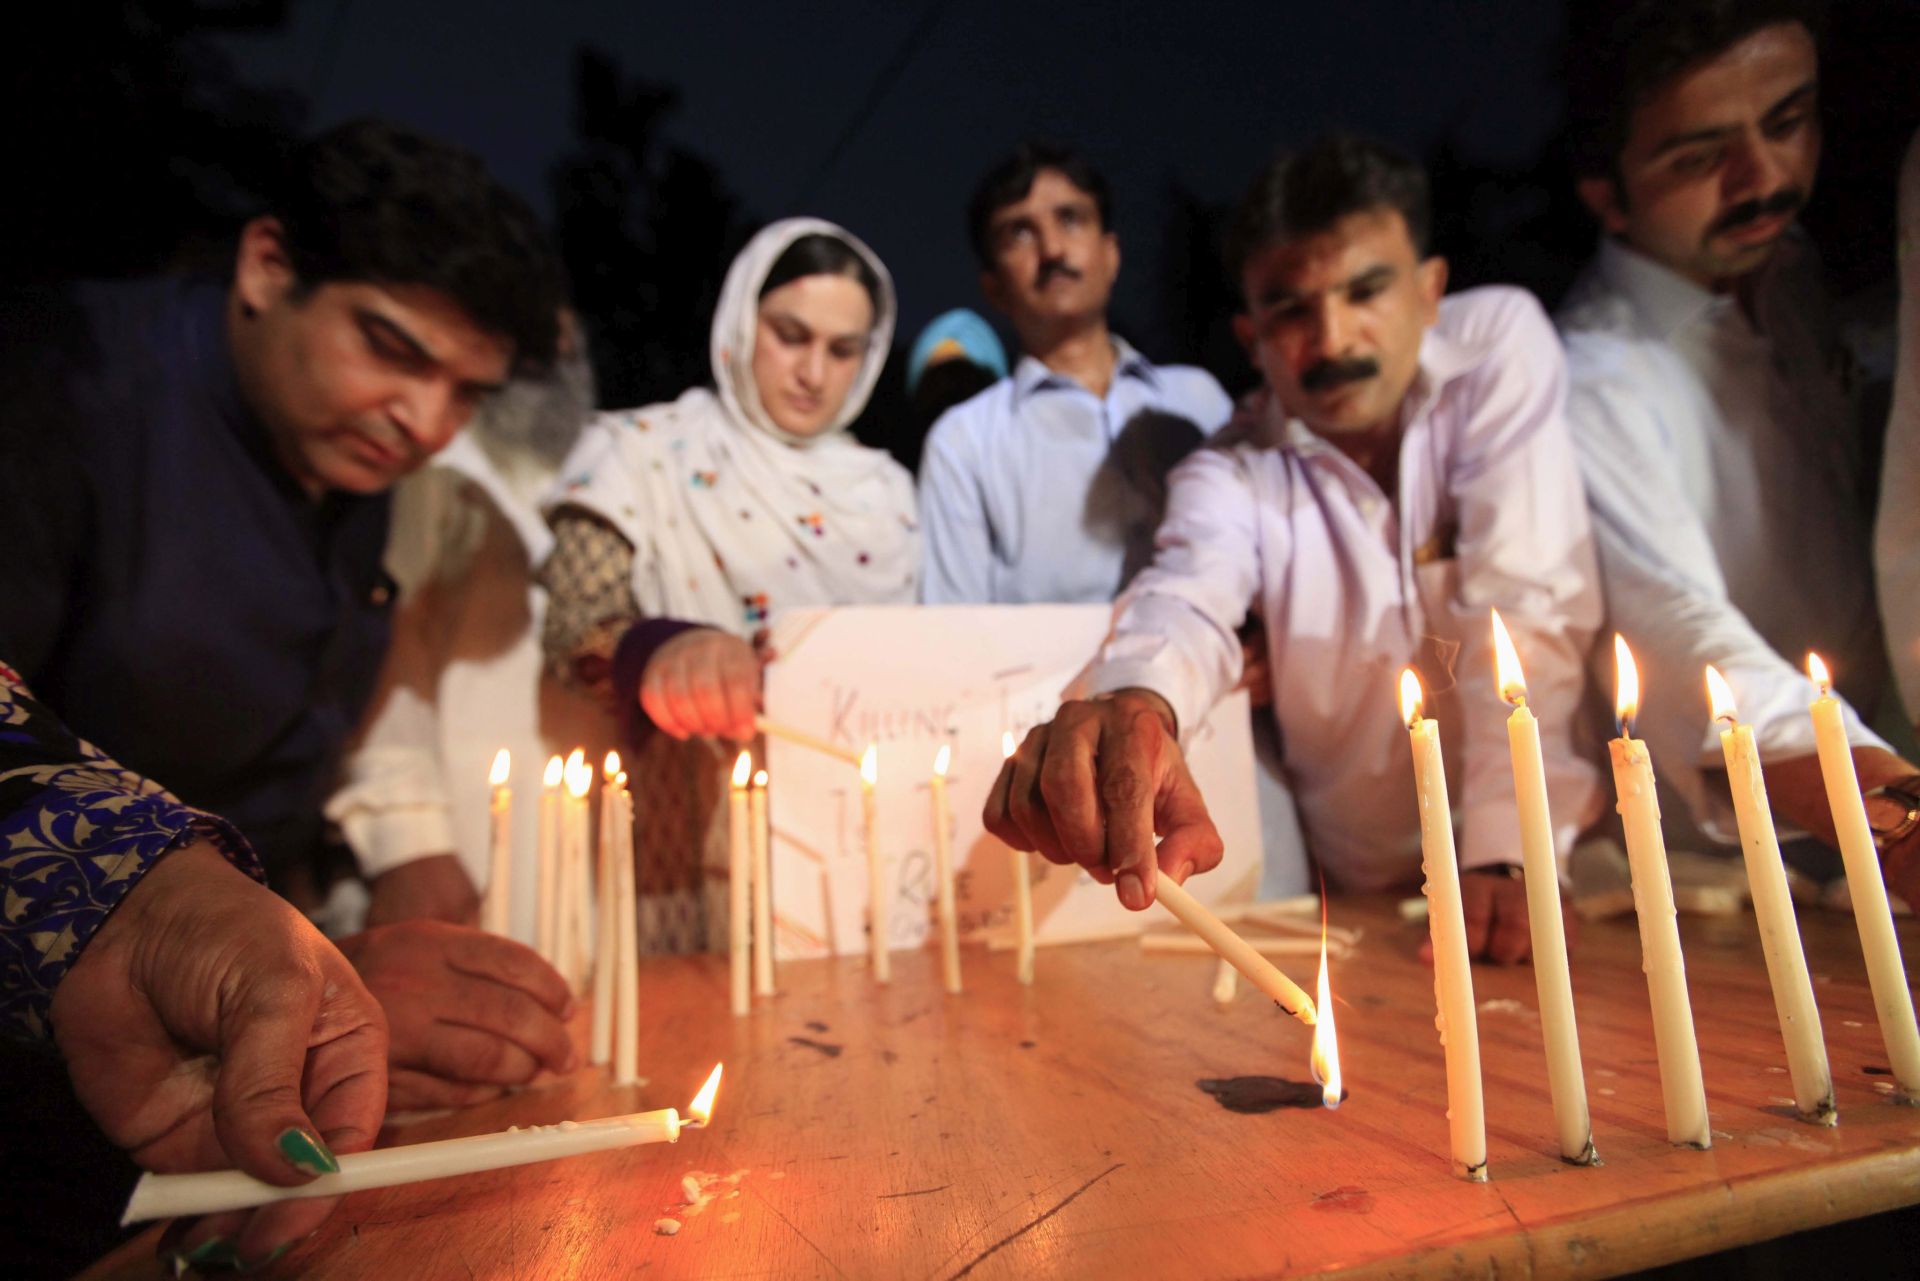 epa05467021 A picture made available on 09 August 2016 shows people lighting candles to mourn the victims of a bomb blast in Quetta, in Peshawar, Pakistan, 08 August 2016. At least 70 people mostly lawyers, including two journalists, were killed when a bomb exploded as dozens of lawyers and journalists gathered outside the civil hospital following the assasination of a senior lawyer in a target killing in Quetta.  EPA/BILAWAL ARBAB